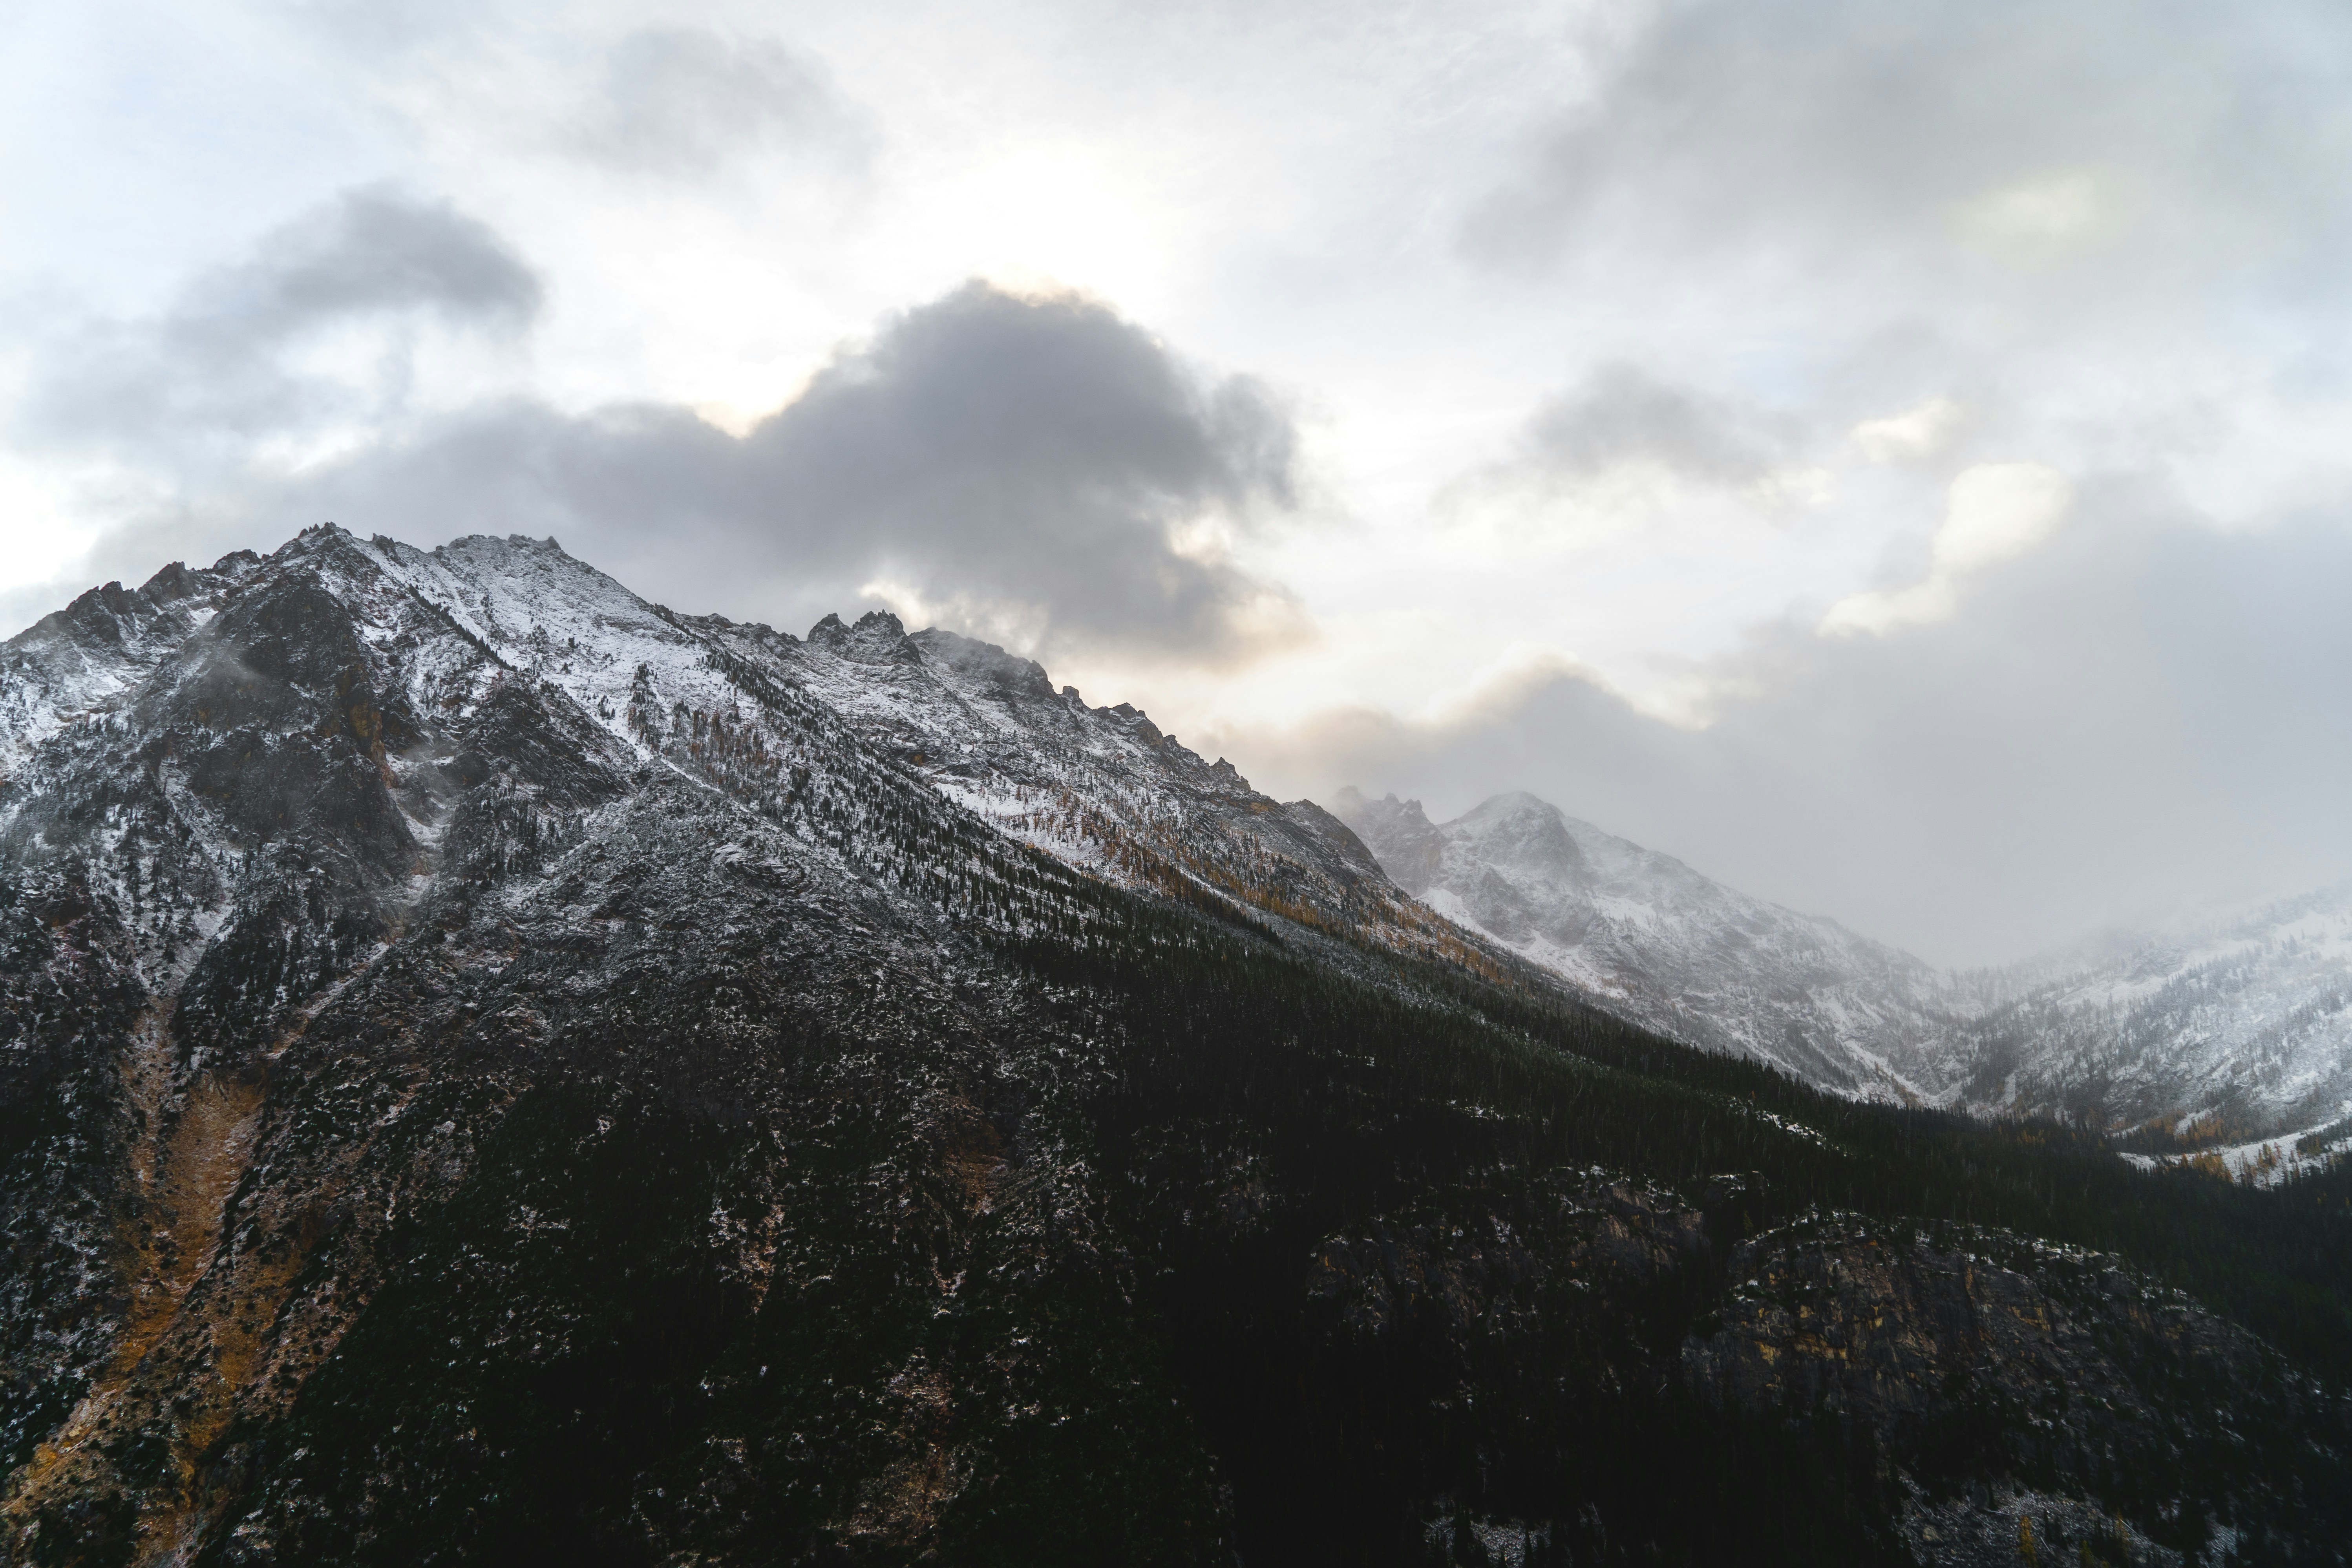 Choose from a curated selection of mountain photos. Always free on Unsplash.